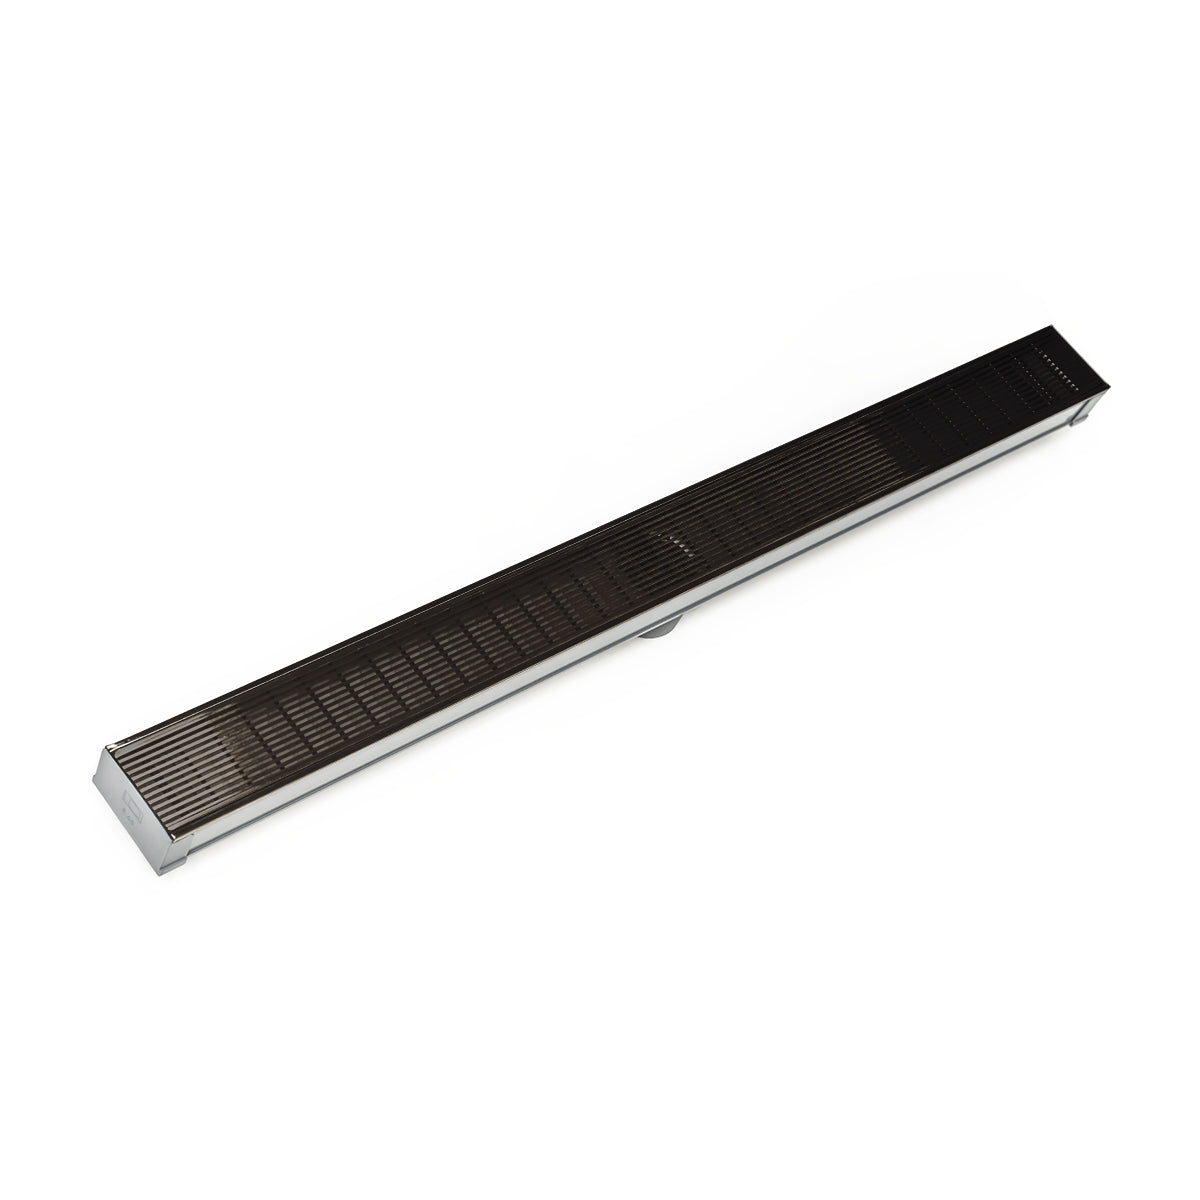 Infinity Drain 48" S-PVC Series Low Profile Site Sizable Linear Drain Kit with 2 1/2" Wedge Wire Grate